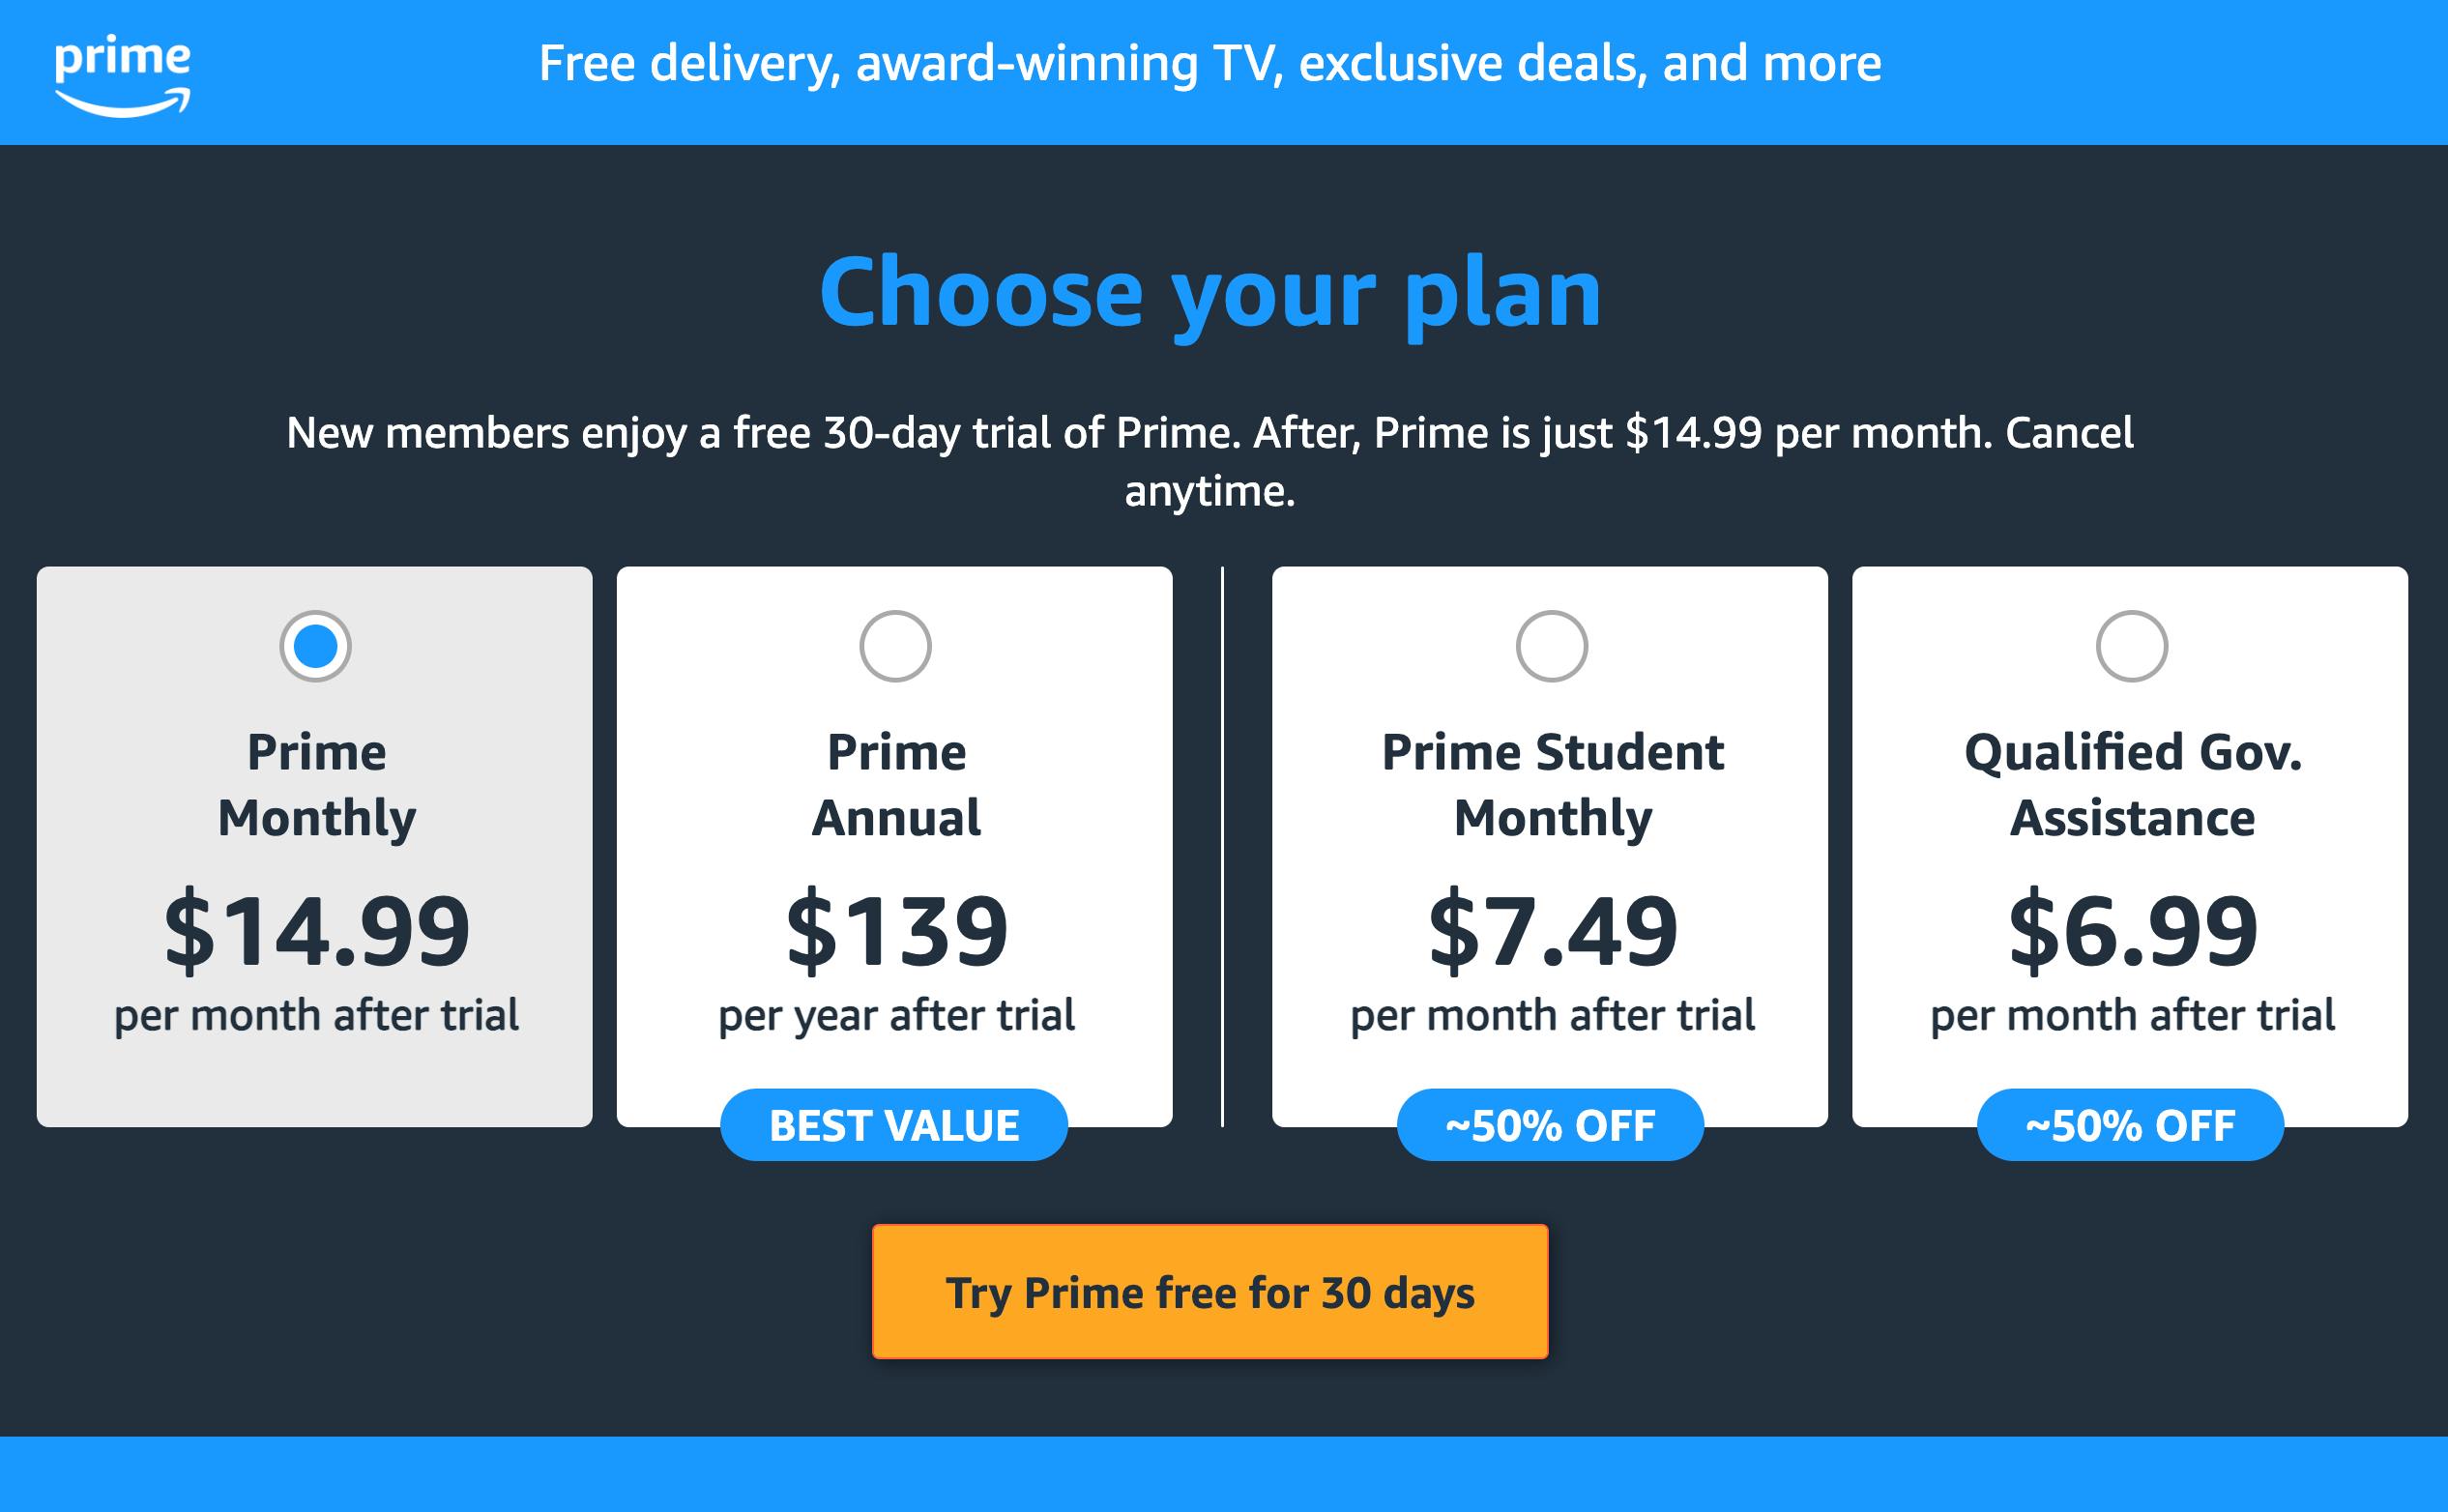 How To Use Amazon Prime On Your Tv Outlets Shop, Save 51 jlcatj.gob.mx